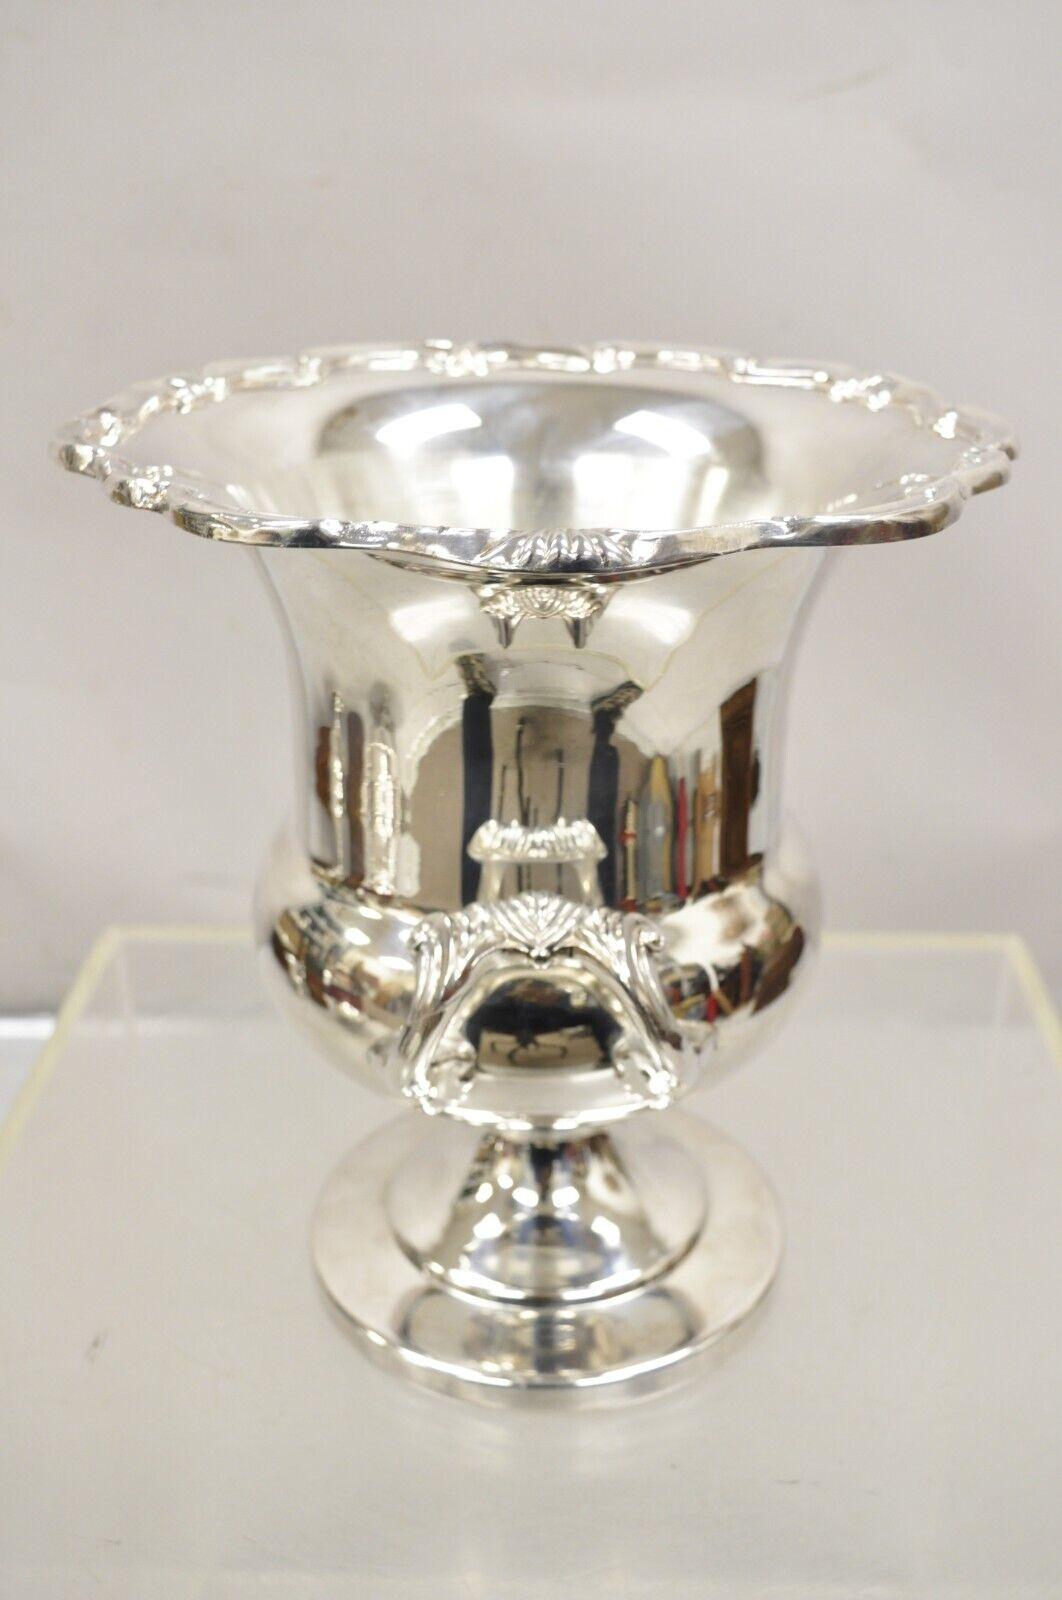 Vintage Towle Silver Plated Champagne Chiller Ice Bucket Trophy Cup engraved 